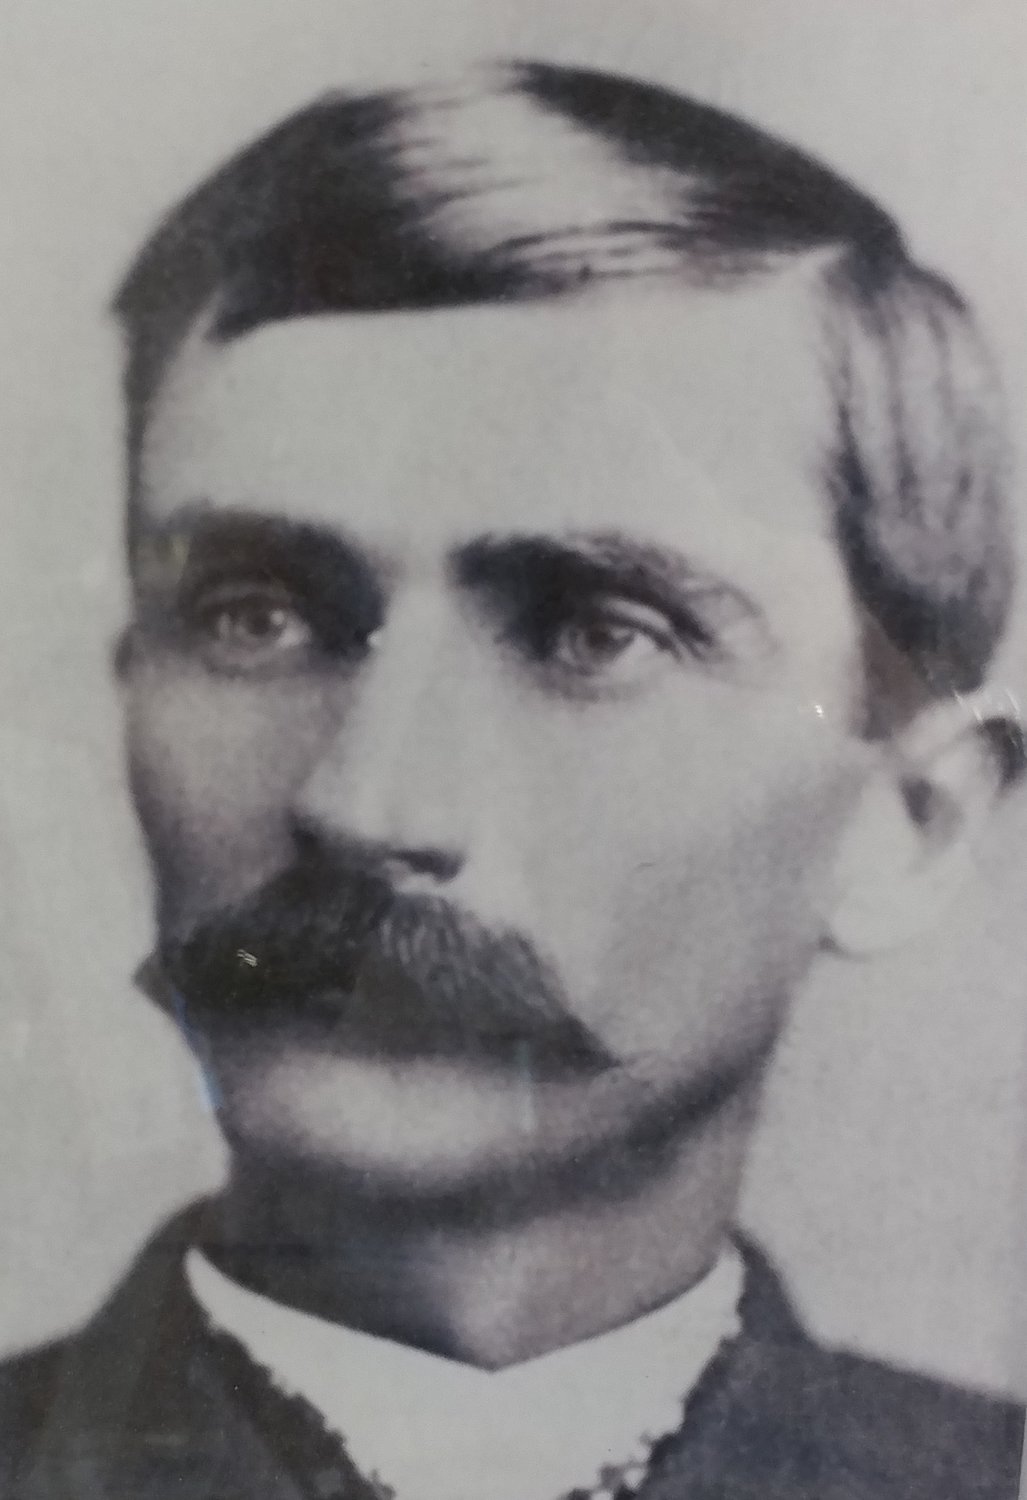 A photo of Pat Garrett hangs in the Historical Museum of Lawmen inside the Doña Ana County Sheriff’s Office, which is part of the county government center at 845 N. Motel Blvd. The museum is open 8 a.m.-5 p.m. Monday-Friday and 10 a.m.-2 p.m. the second and fourth Saturdays of each month.
There is no charge to visit the museum, which has pictures of county sheriffs dating back to 1852.